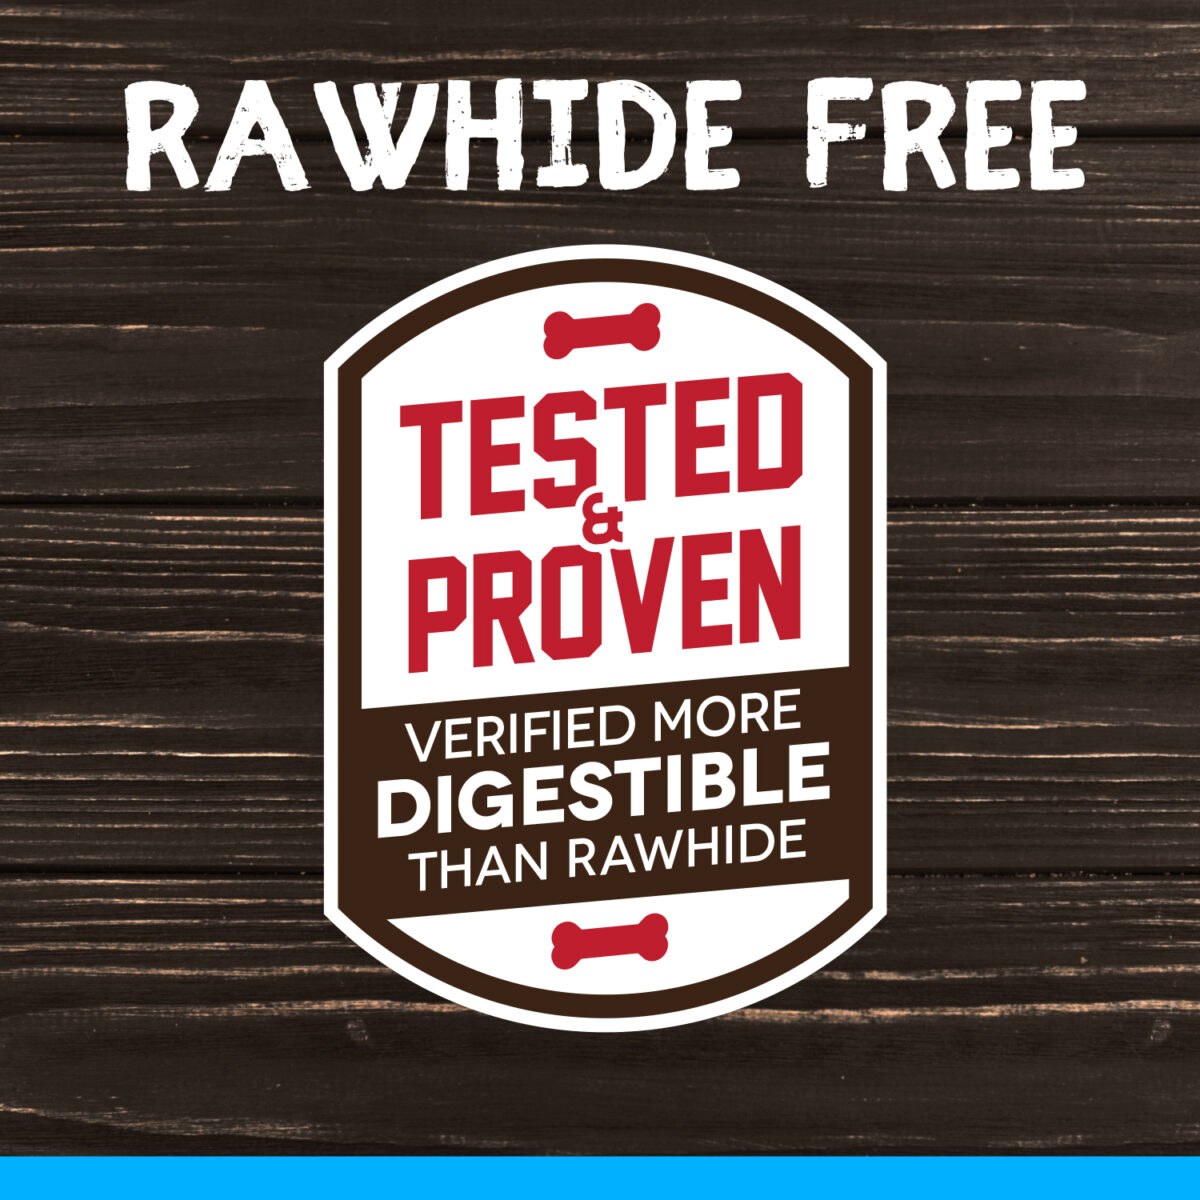 Are Rawhide Free Bones Safe For Dogs